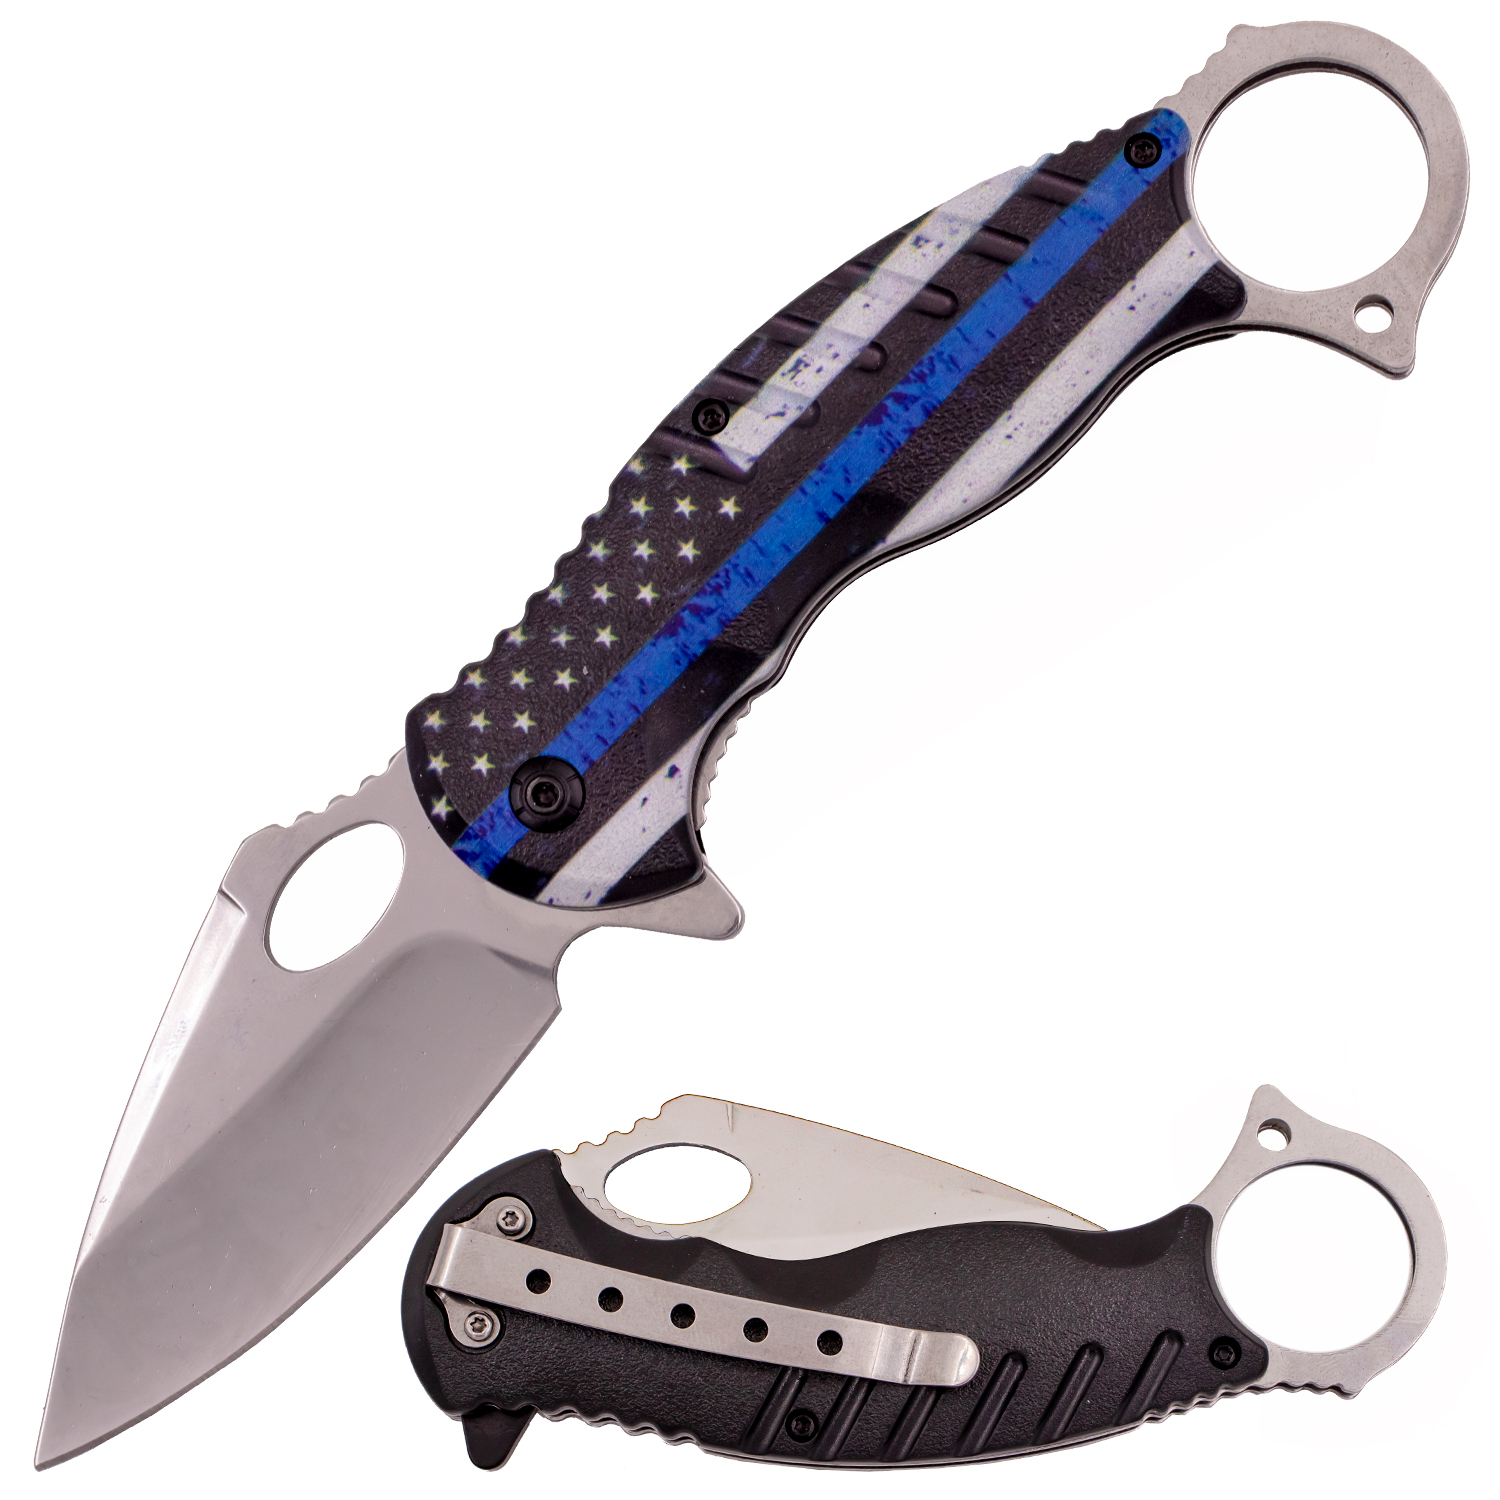 Tiger USA Spring Assisted Knife   Thin Blue Line Pt. II